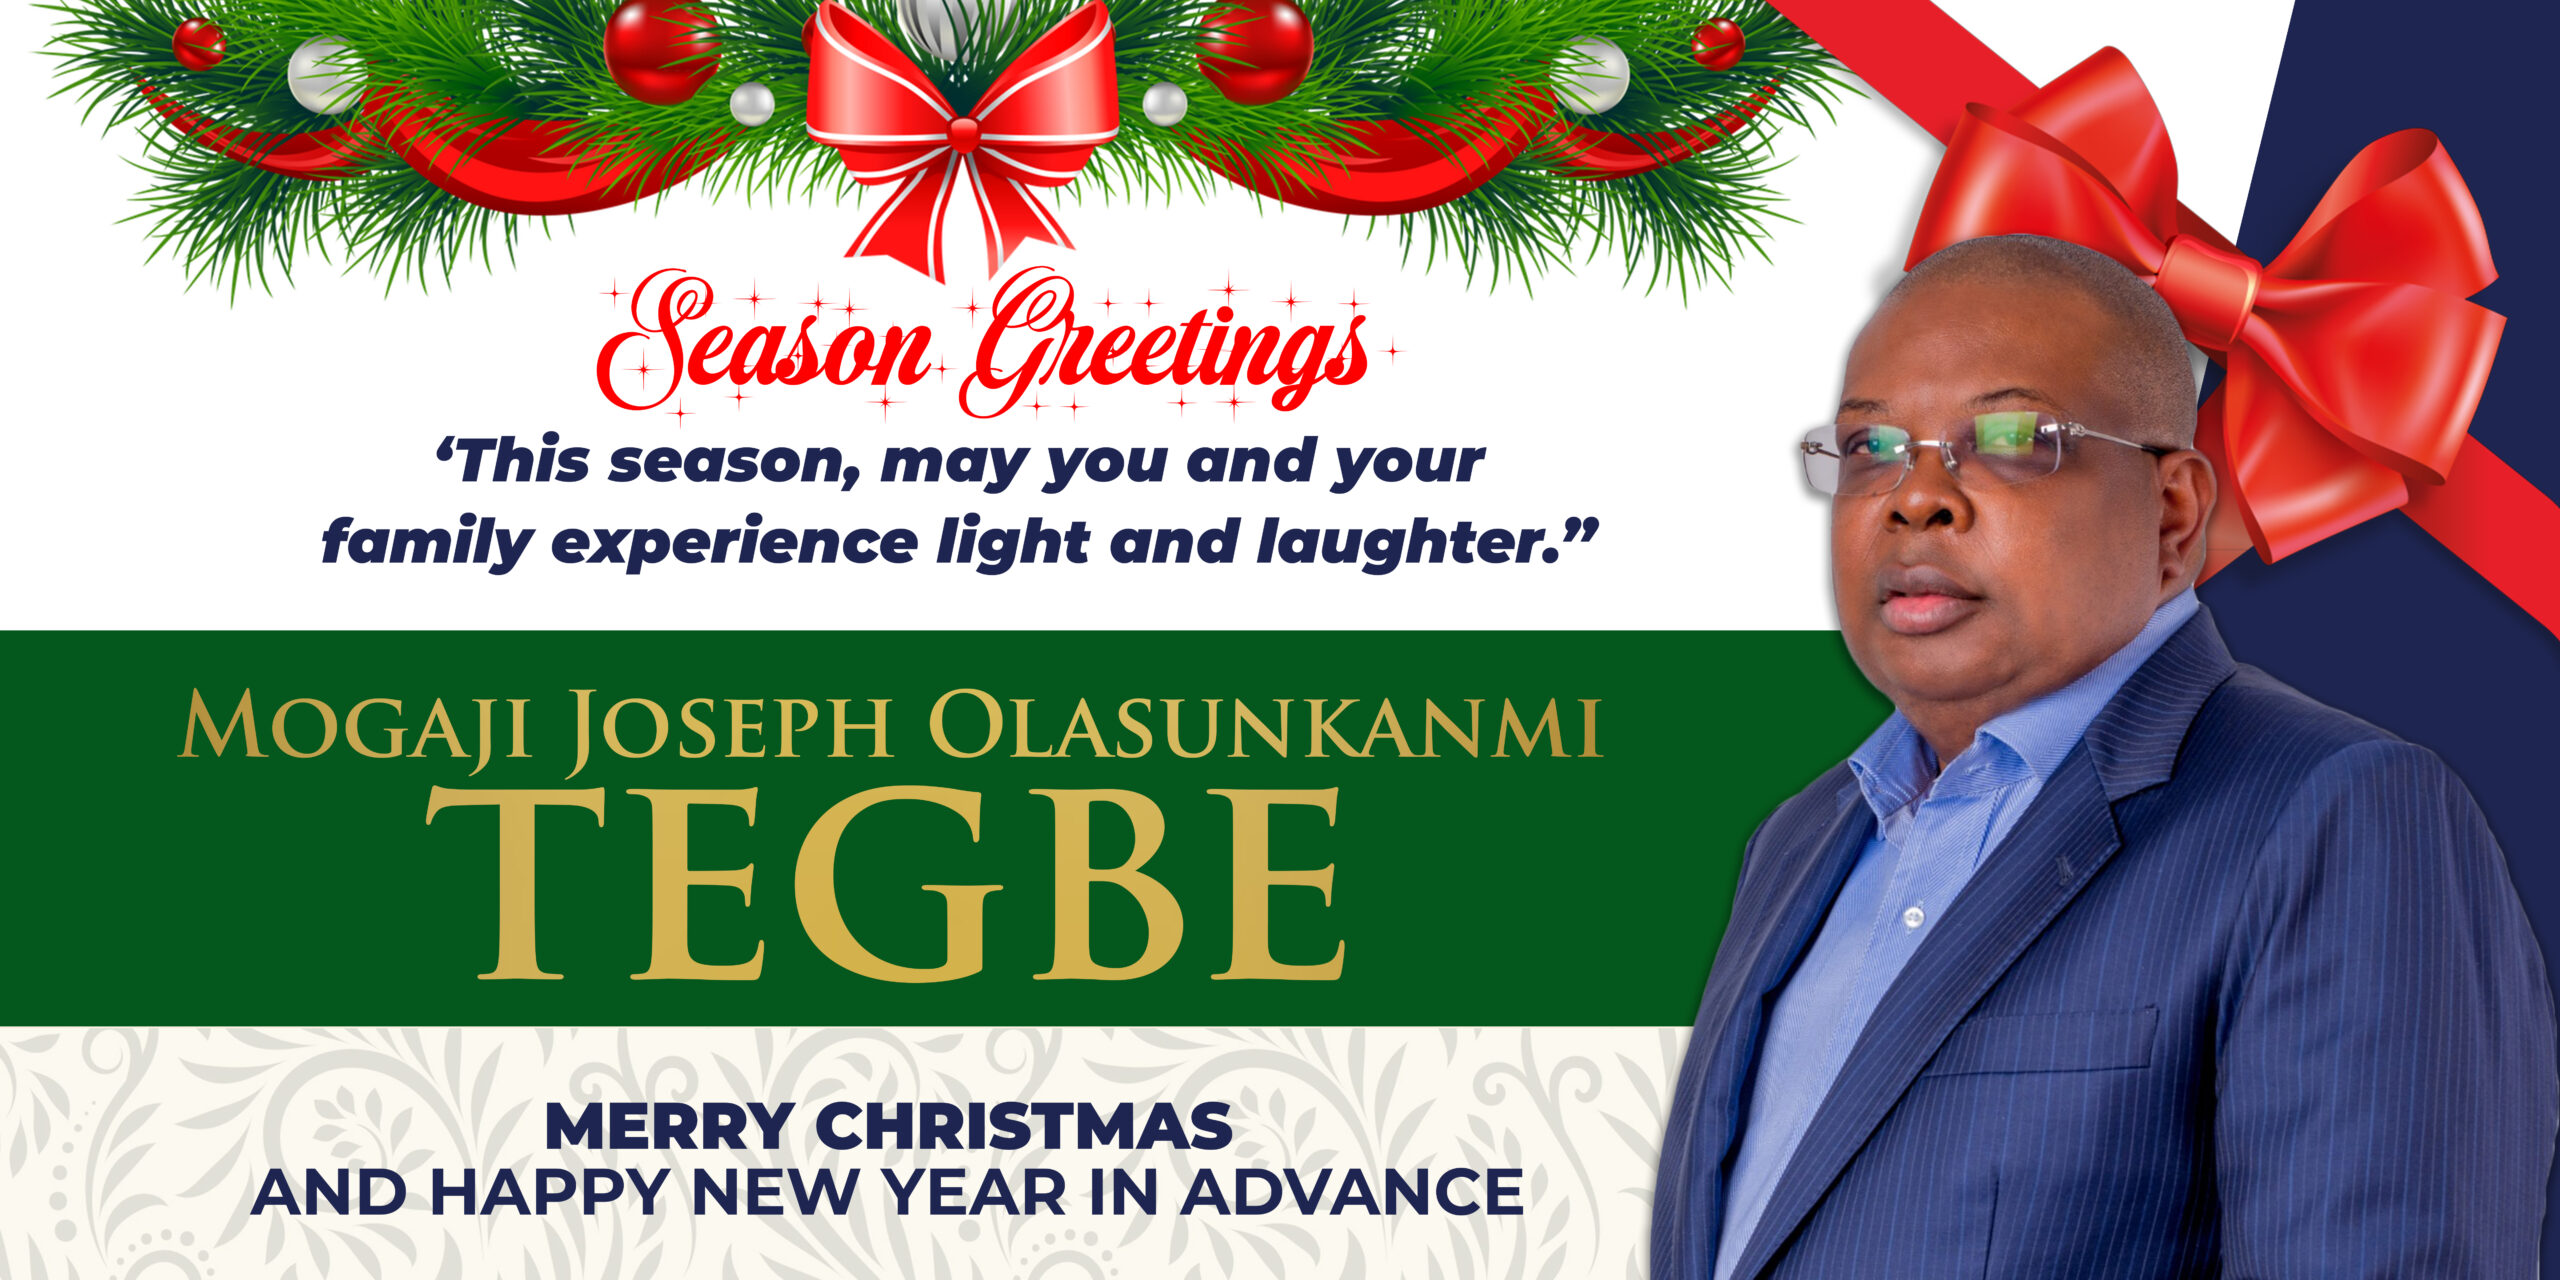 Chief Tegbe celebrates with Nigerians at Christmas, urges precaution.